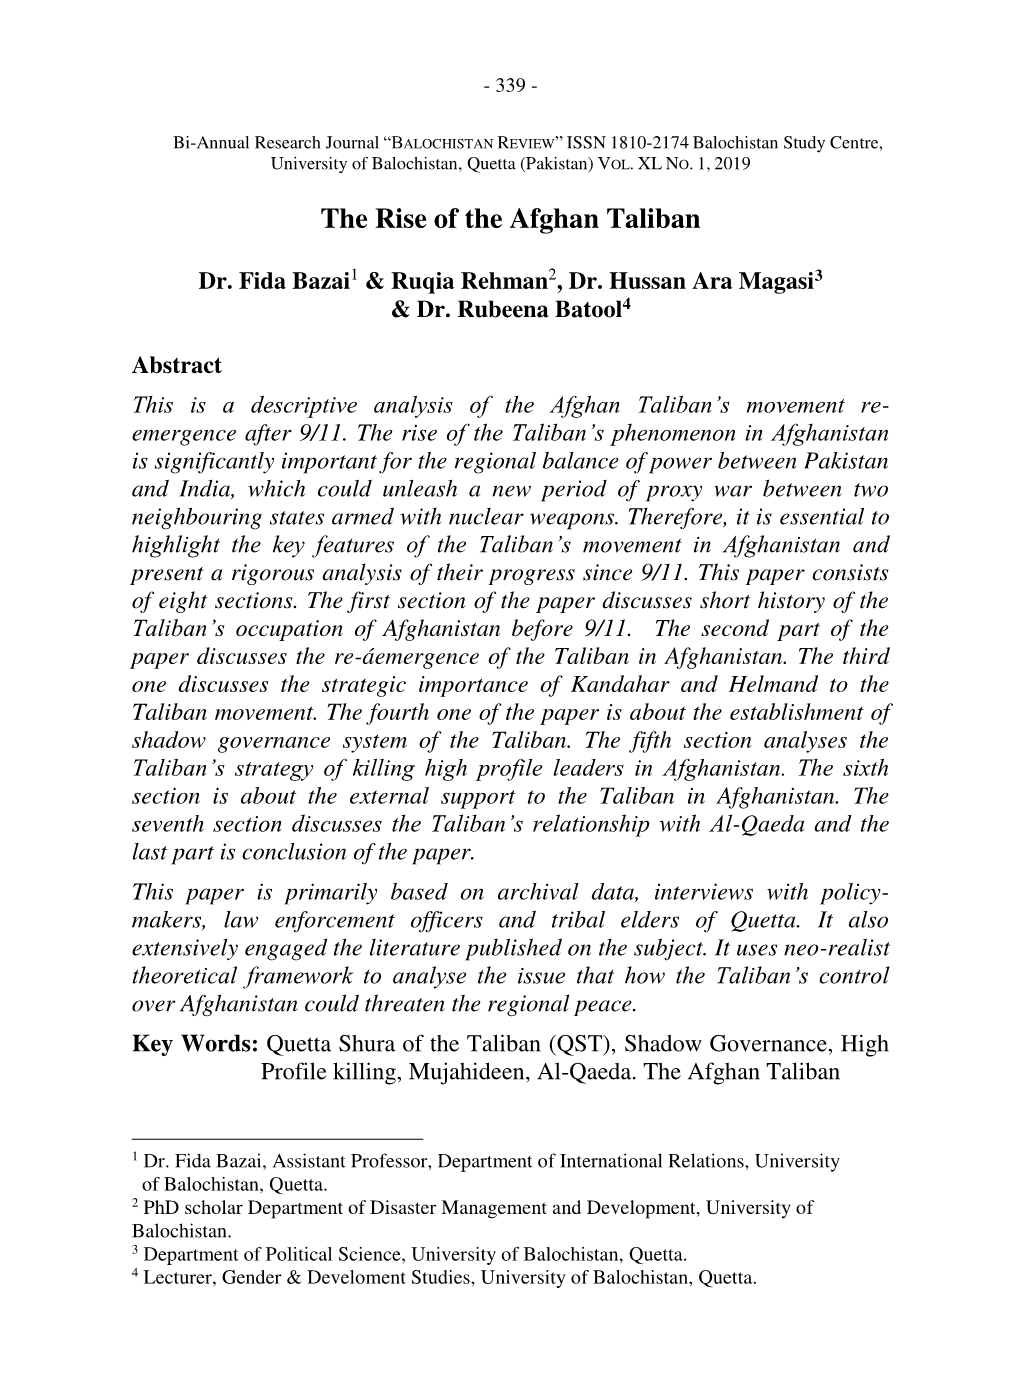 The Rise of the Afghan Taliban